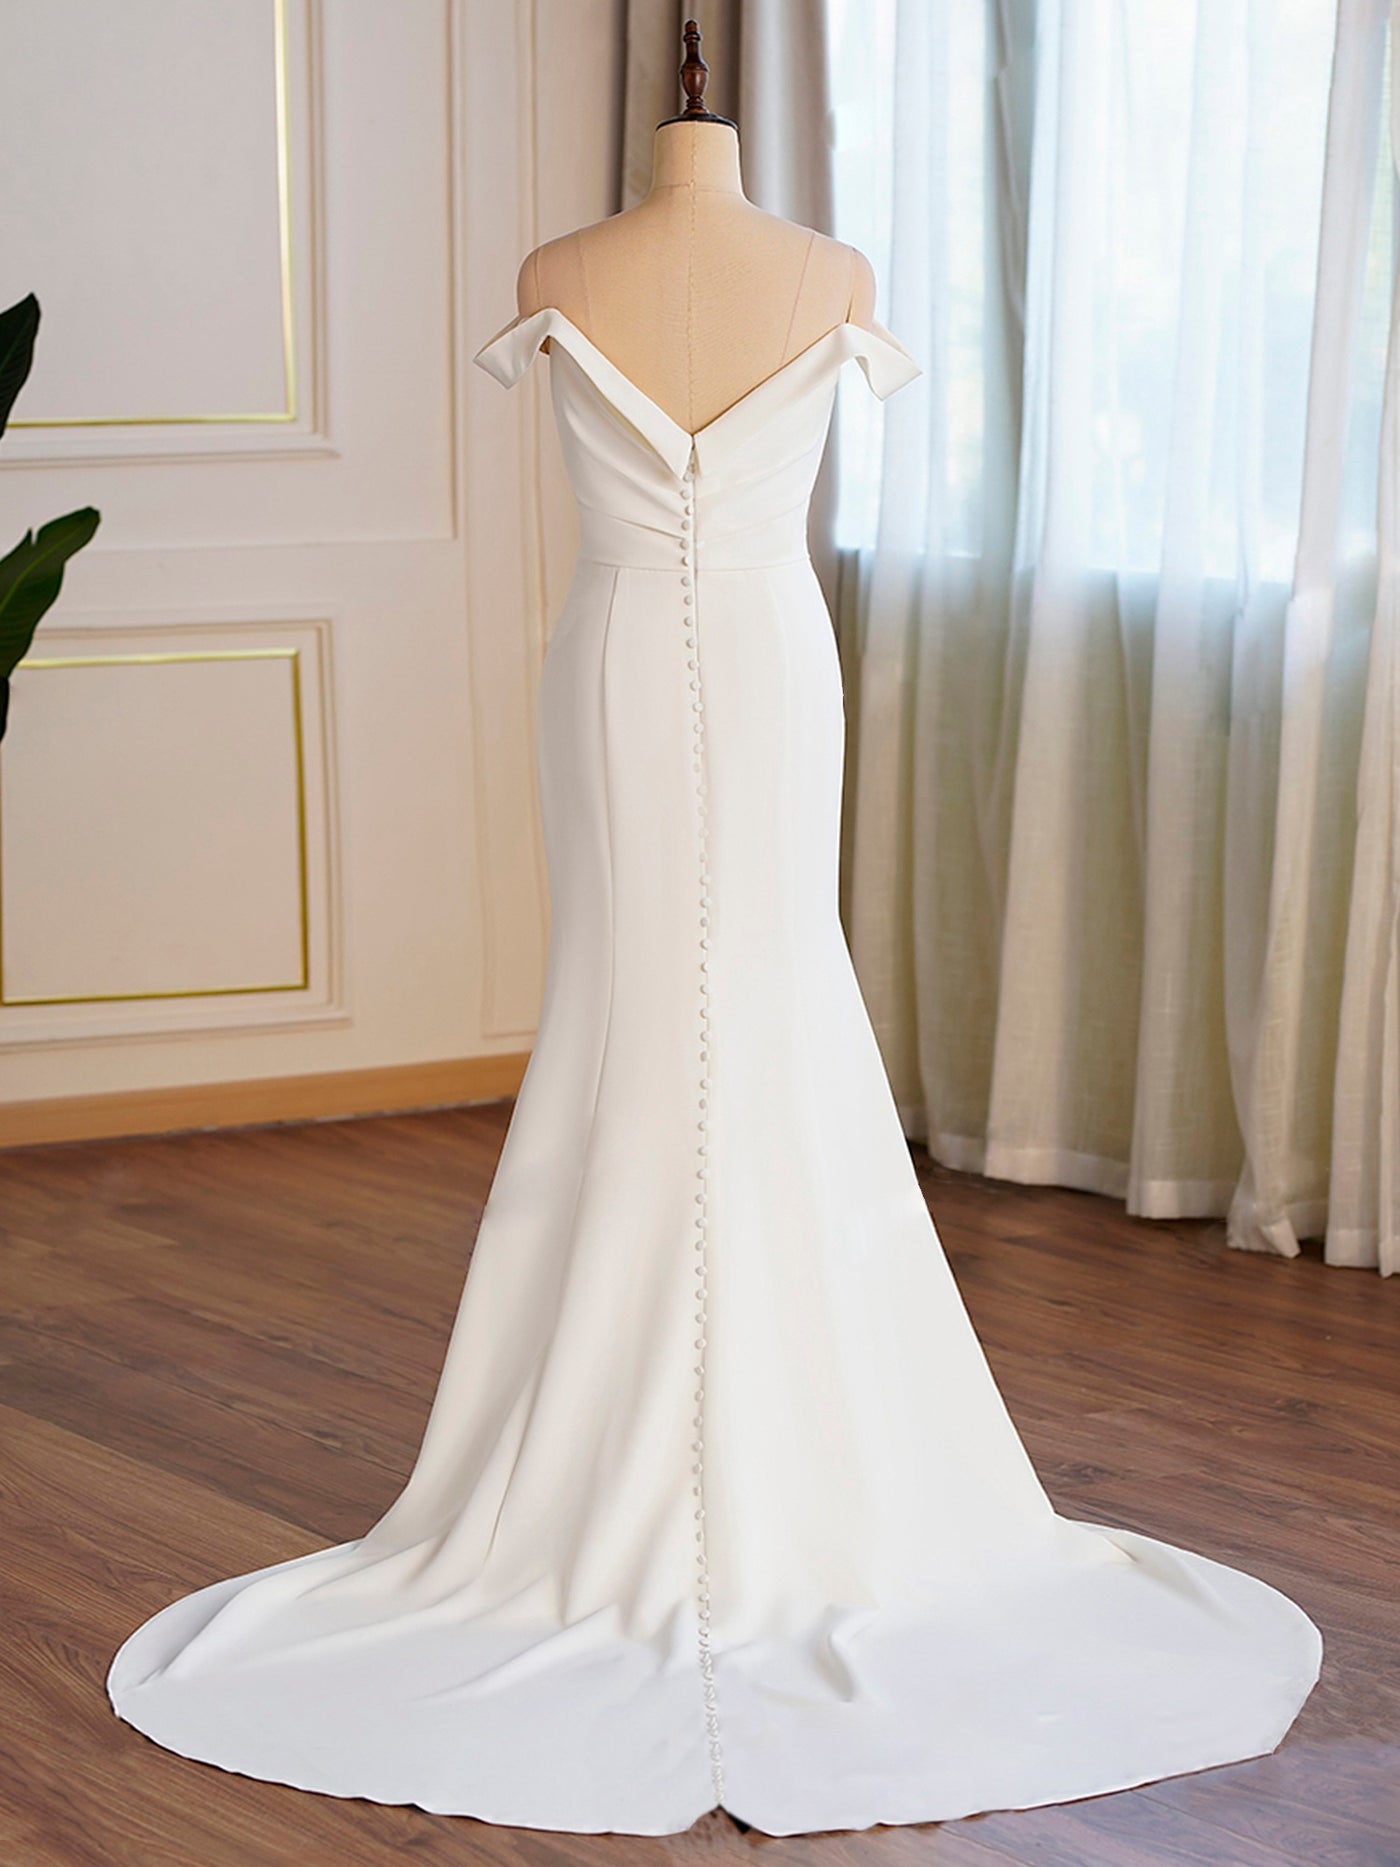 Elegant Bergamot Bridal white wedding dress with an off-shoulder design and a train, displayed on a mannequin in one of the bridal shops in London, Ontario, adorned with curtains.